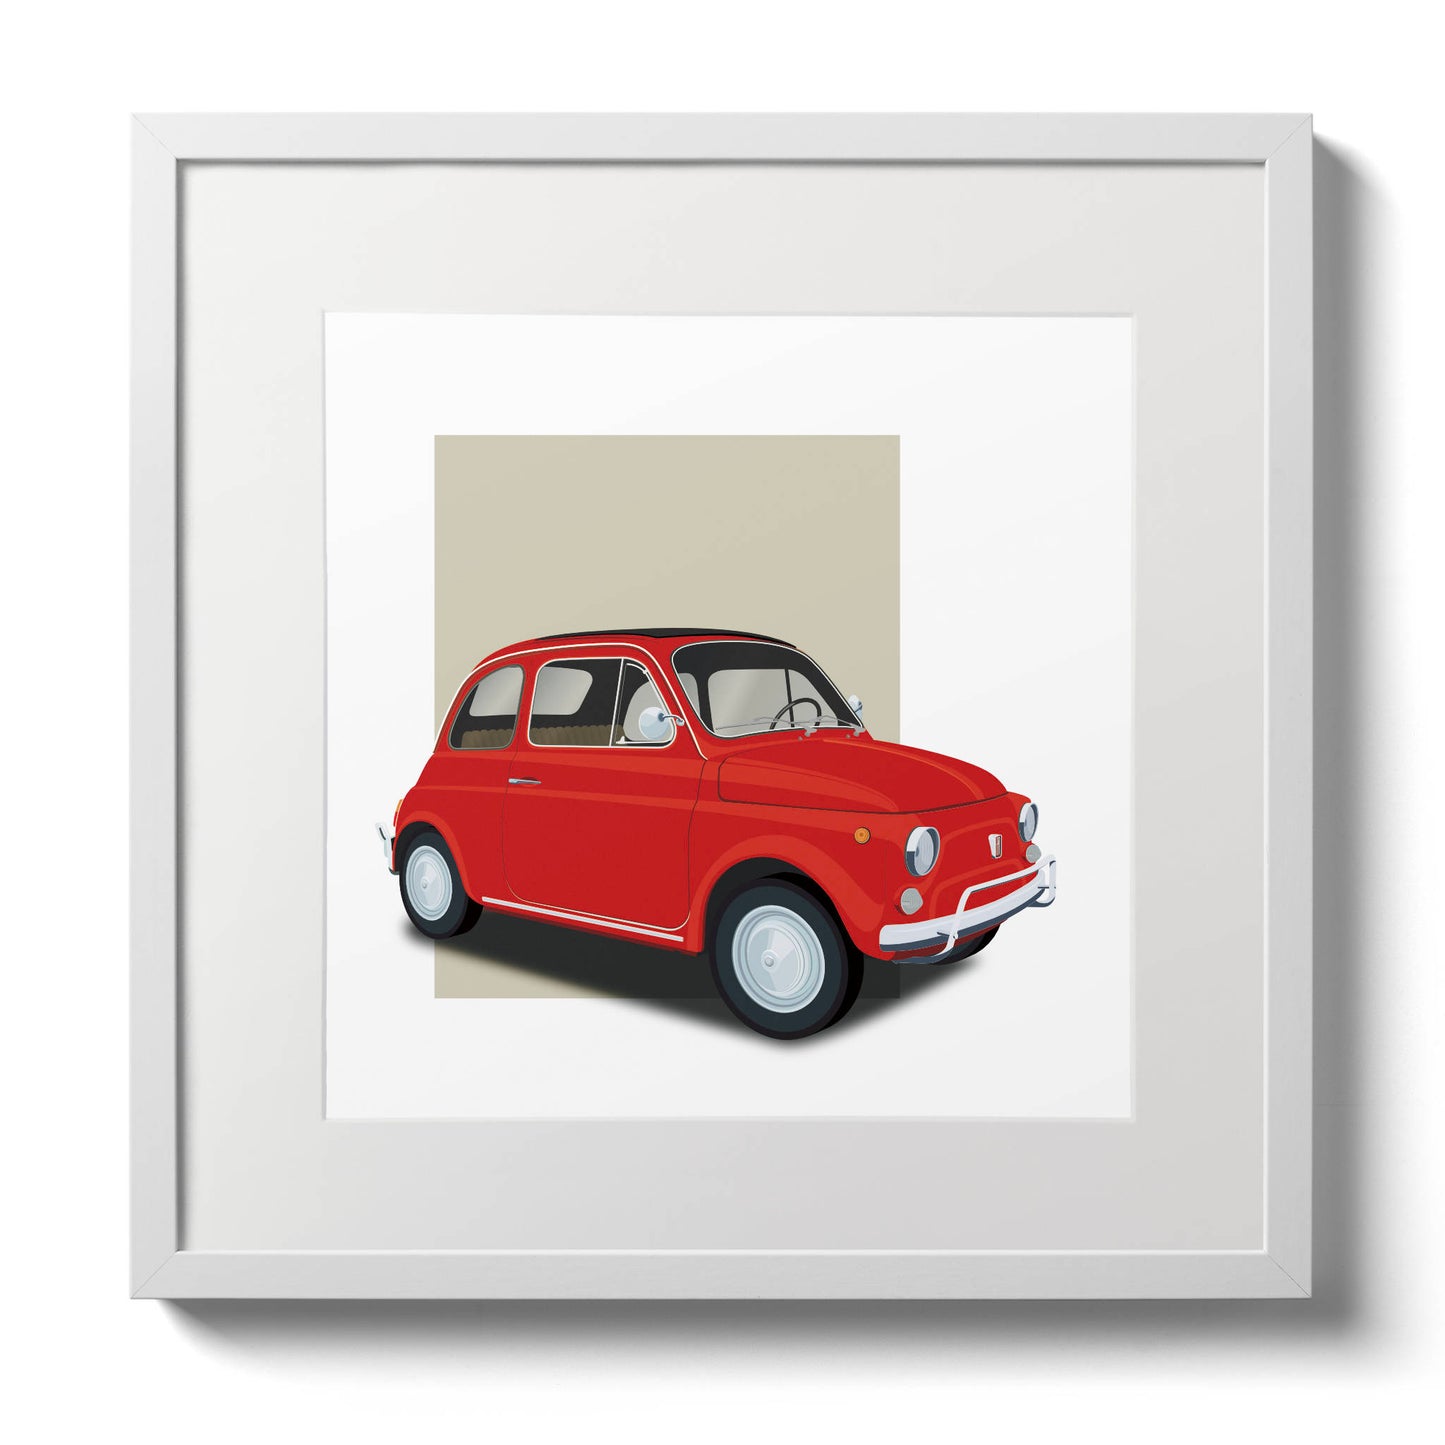 Modern illustration of the classic 1960s Fiat 500 Cinquecento in a gorgeous red colour with dark background, measuring 30 x 30cm